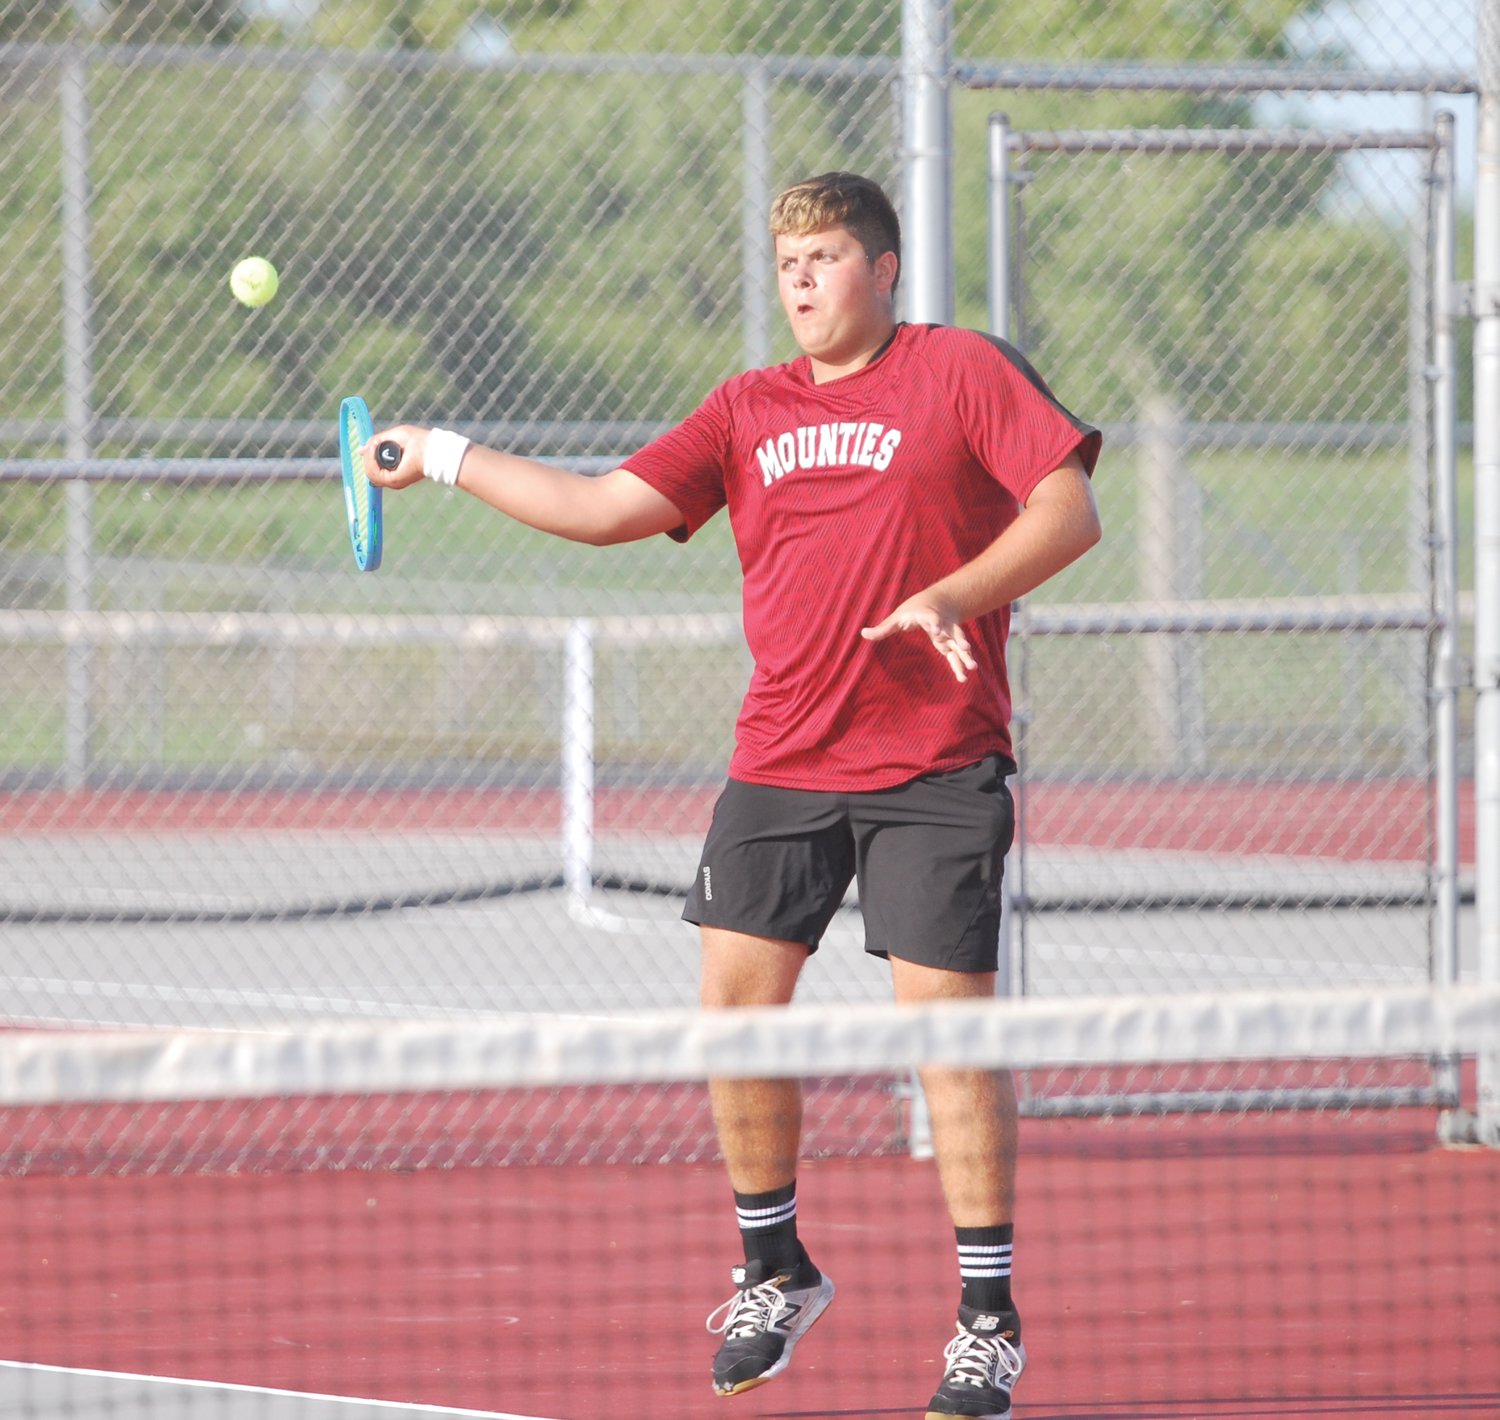 Southmont's Mason Hall and his doubles' partner Micah Korhorn blanked Zack Fichter and Ziair Morgan 6-0, 6-0 in the No. 1 spot against Crawfordsville on Thursday.